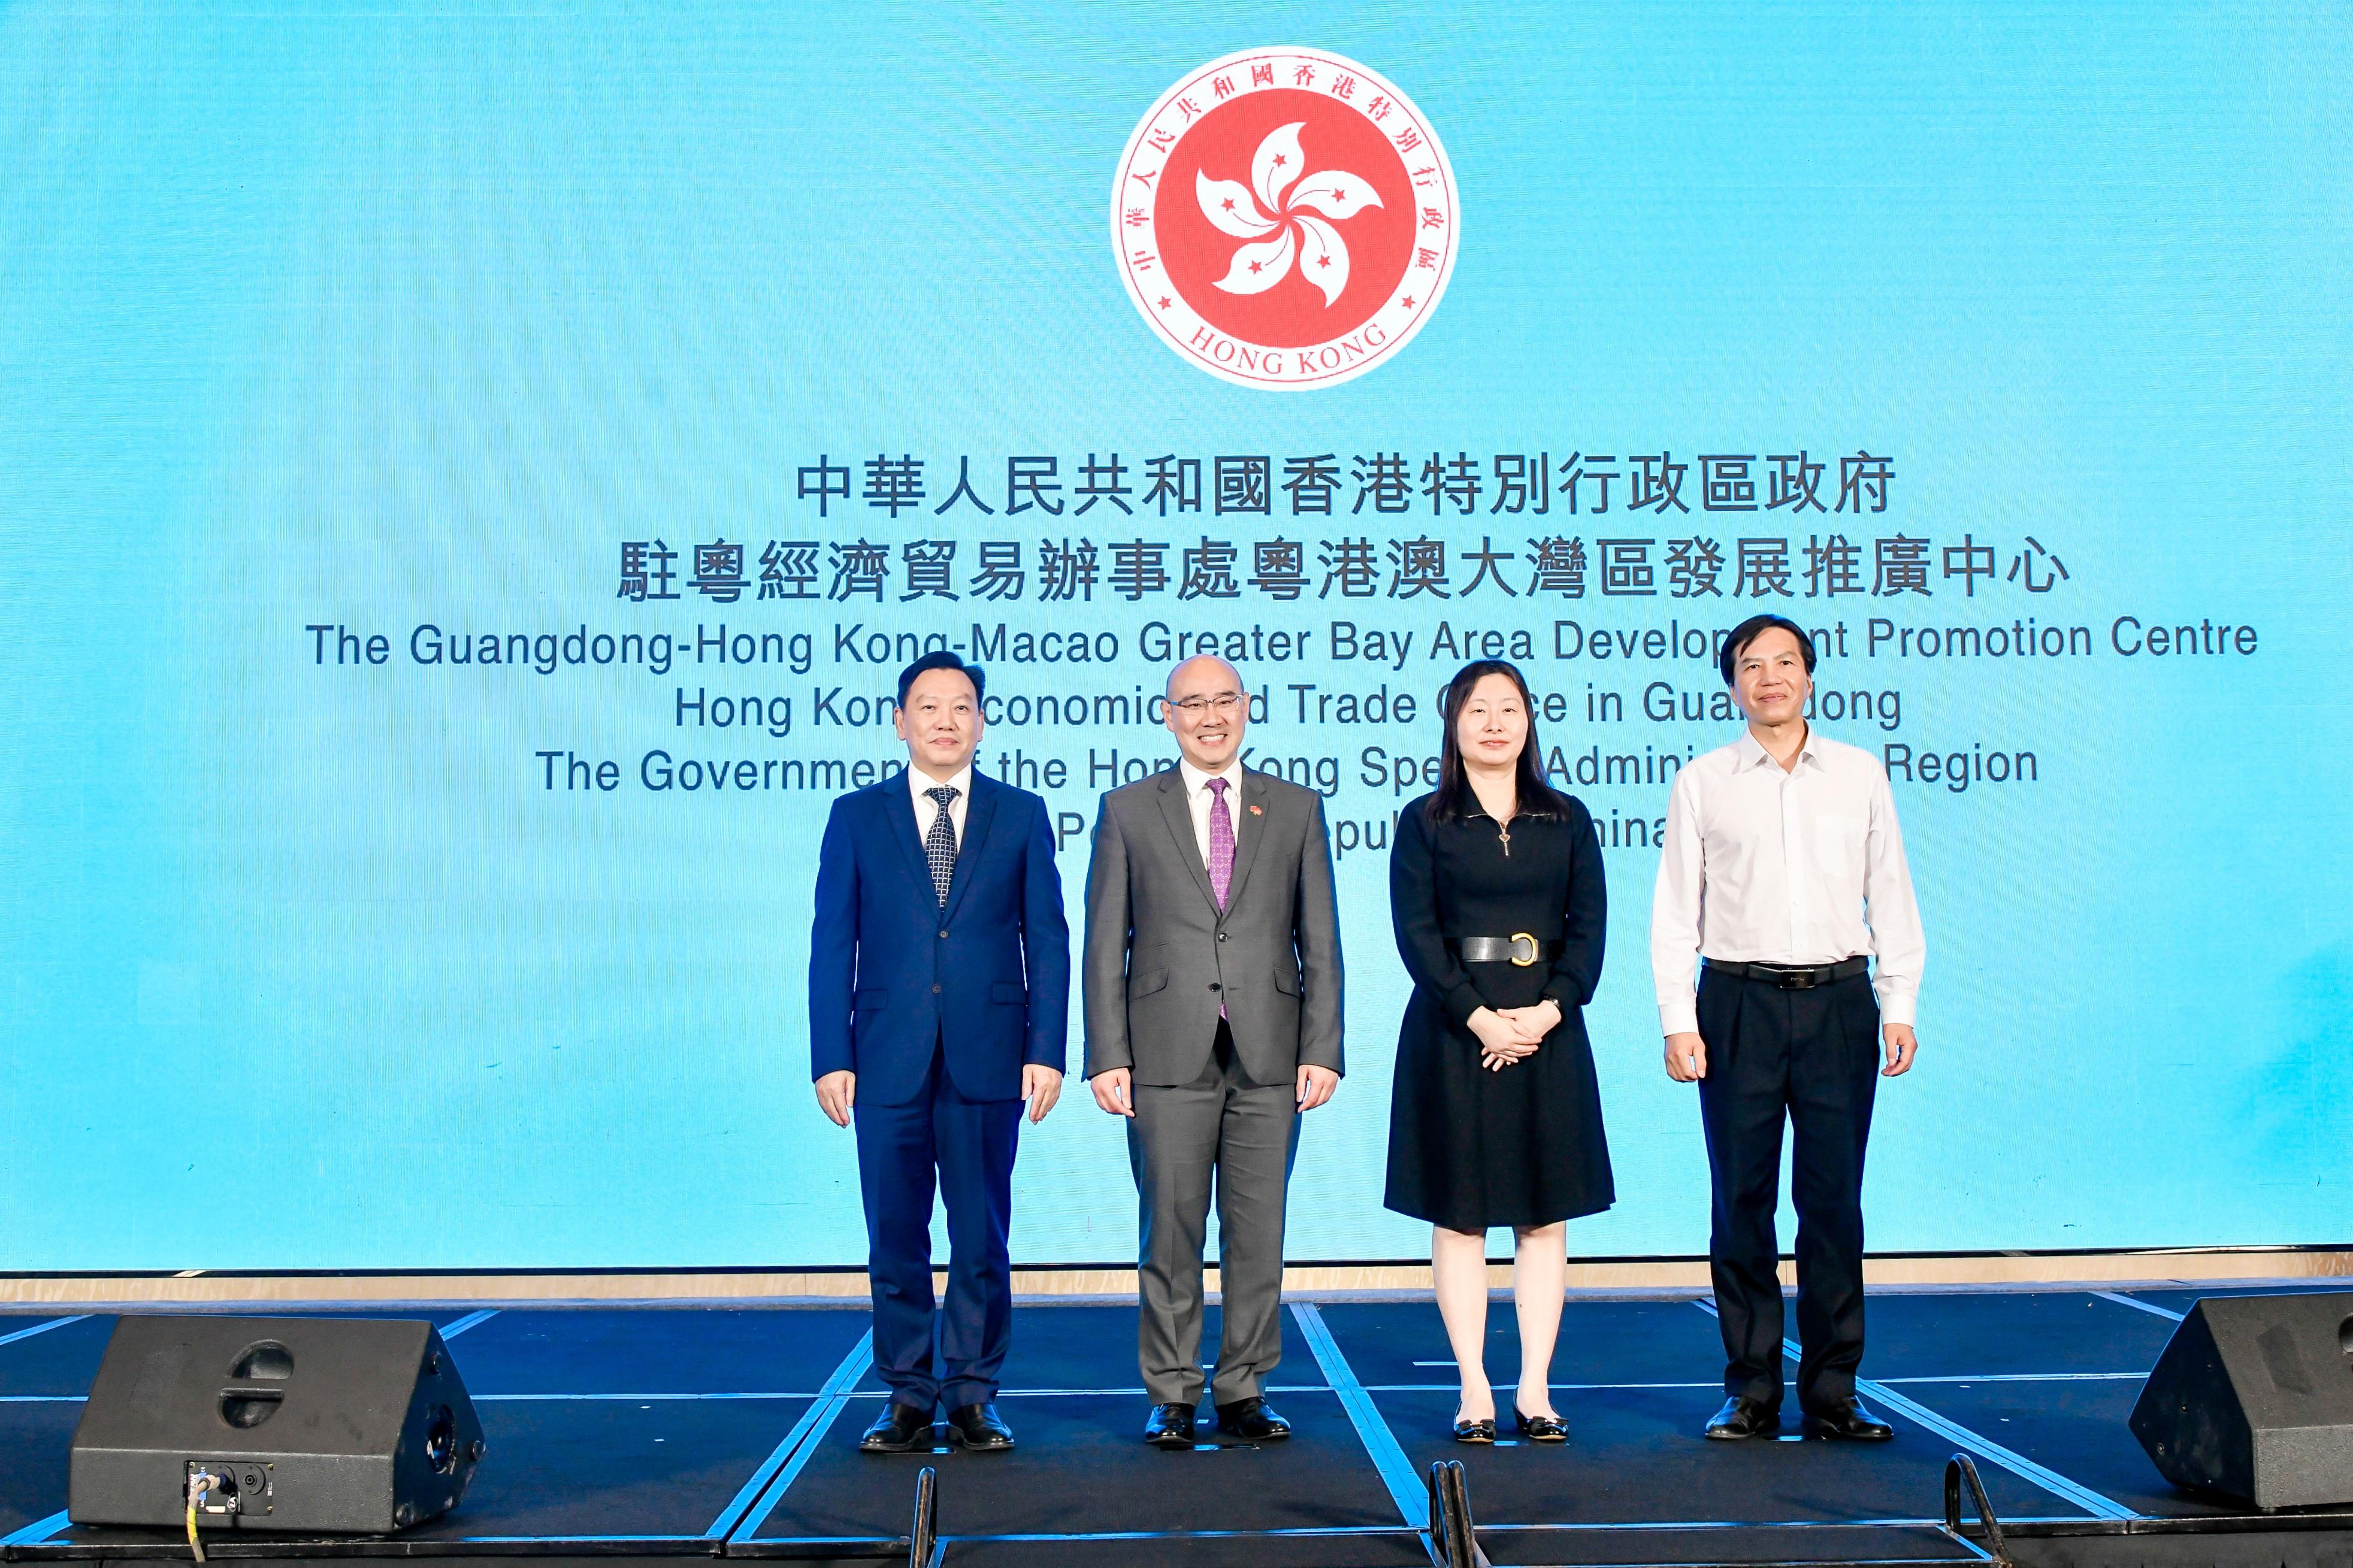 The Acting Commissioner for the Development of the Guangdong-Hong Kong-Macao Greater Bay Area, Mr Benjamin Mok (second left); the Director of Hong Kong Economic and Trade Office in Guangdong, Miss Linda So (second right); the Deputy Director General of the Hong Kong and Macao Affairs Office of the People's Government of Guangdong Province, Mr Huang Duanlian (first left); and the Second-level Inspector of the Office of the Leading Group on Construction of Guangdong-Hong Kong-Macao Greater Bay Area of Guangdong Province, Mr Su Weiguang (first right), officiate at the plaque unveiling ceremony of the Guangdong-Hong Kong-Macao Greater Bay Area Development Promotion Centre in Guangzhou today (April 26).